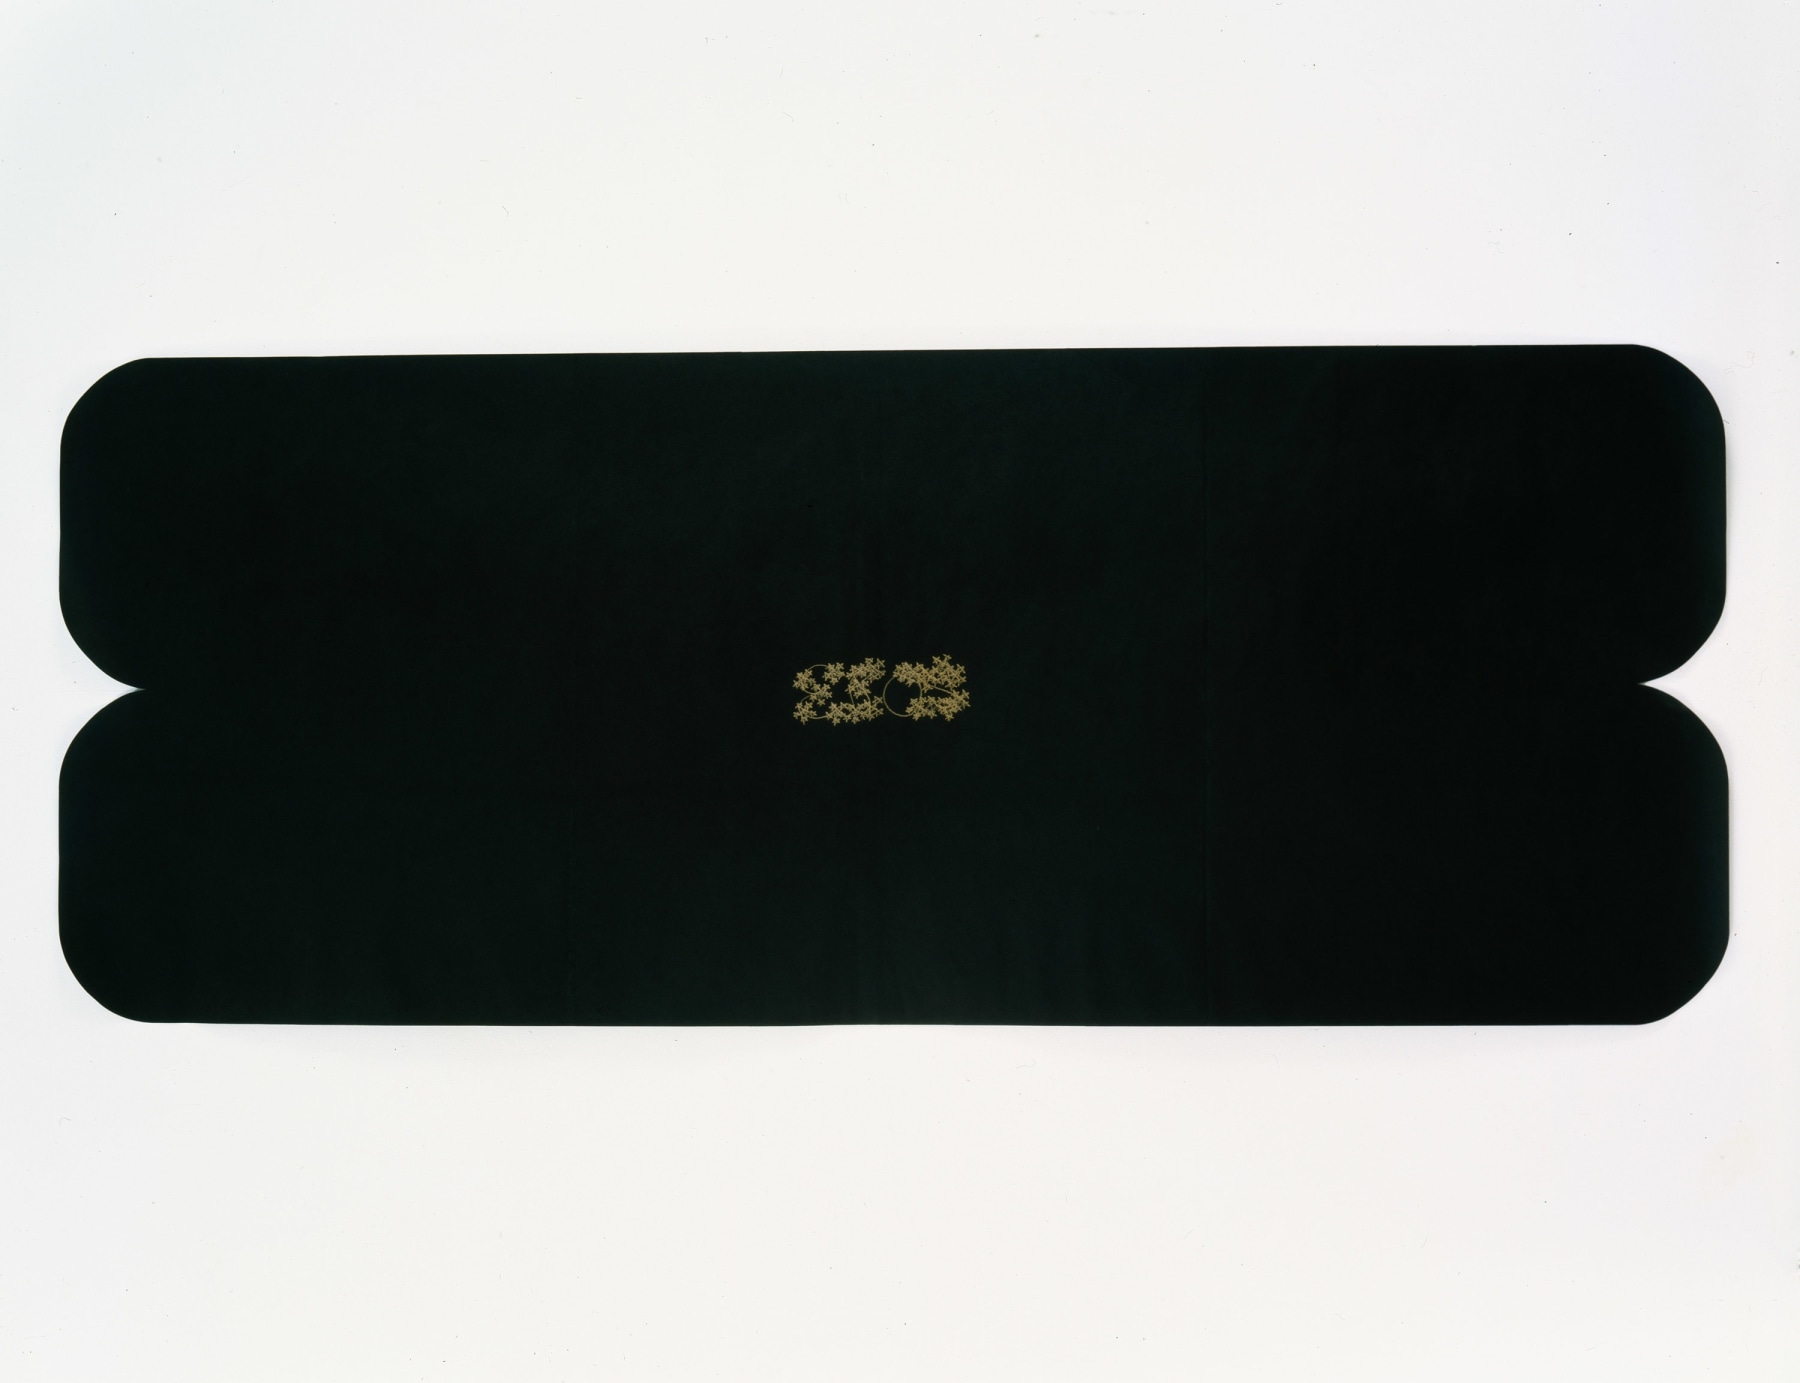 James Lee Byars

&amp;quot;Eros&amp;quot;, 1993

Gold pencil on Japanese paper

67&amp;nbsp; x 26 3/4 inches

170 x 68 cm

JBZ 190

$175,000